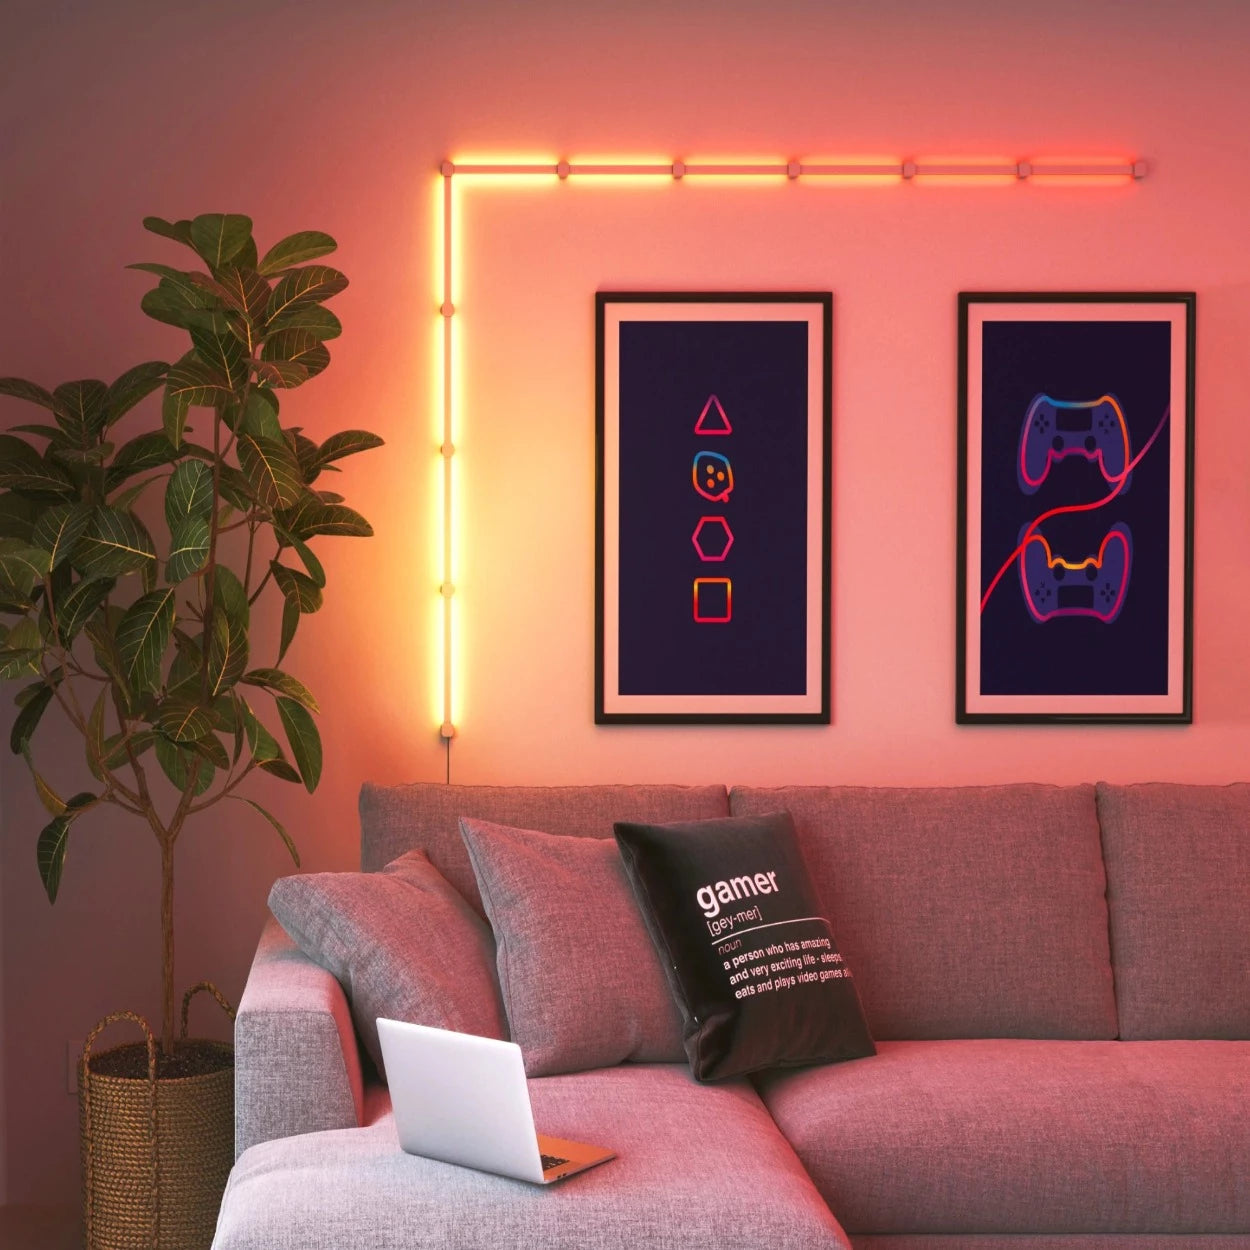 NANOLEAF LINES 60 DEGREES FOR GAMING ROOM AND HOME AUTOMATION